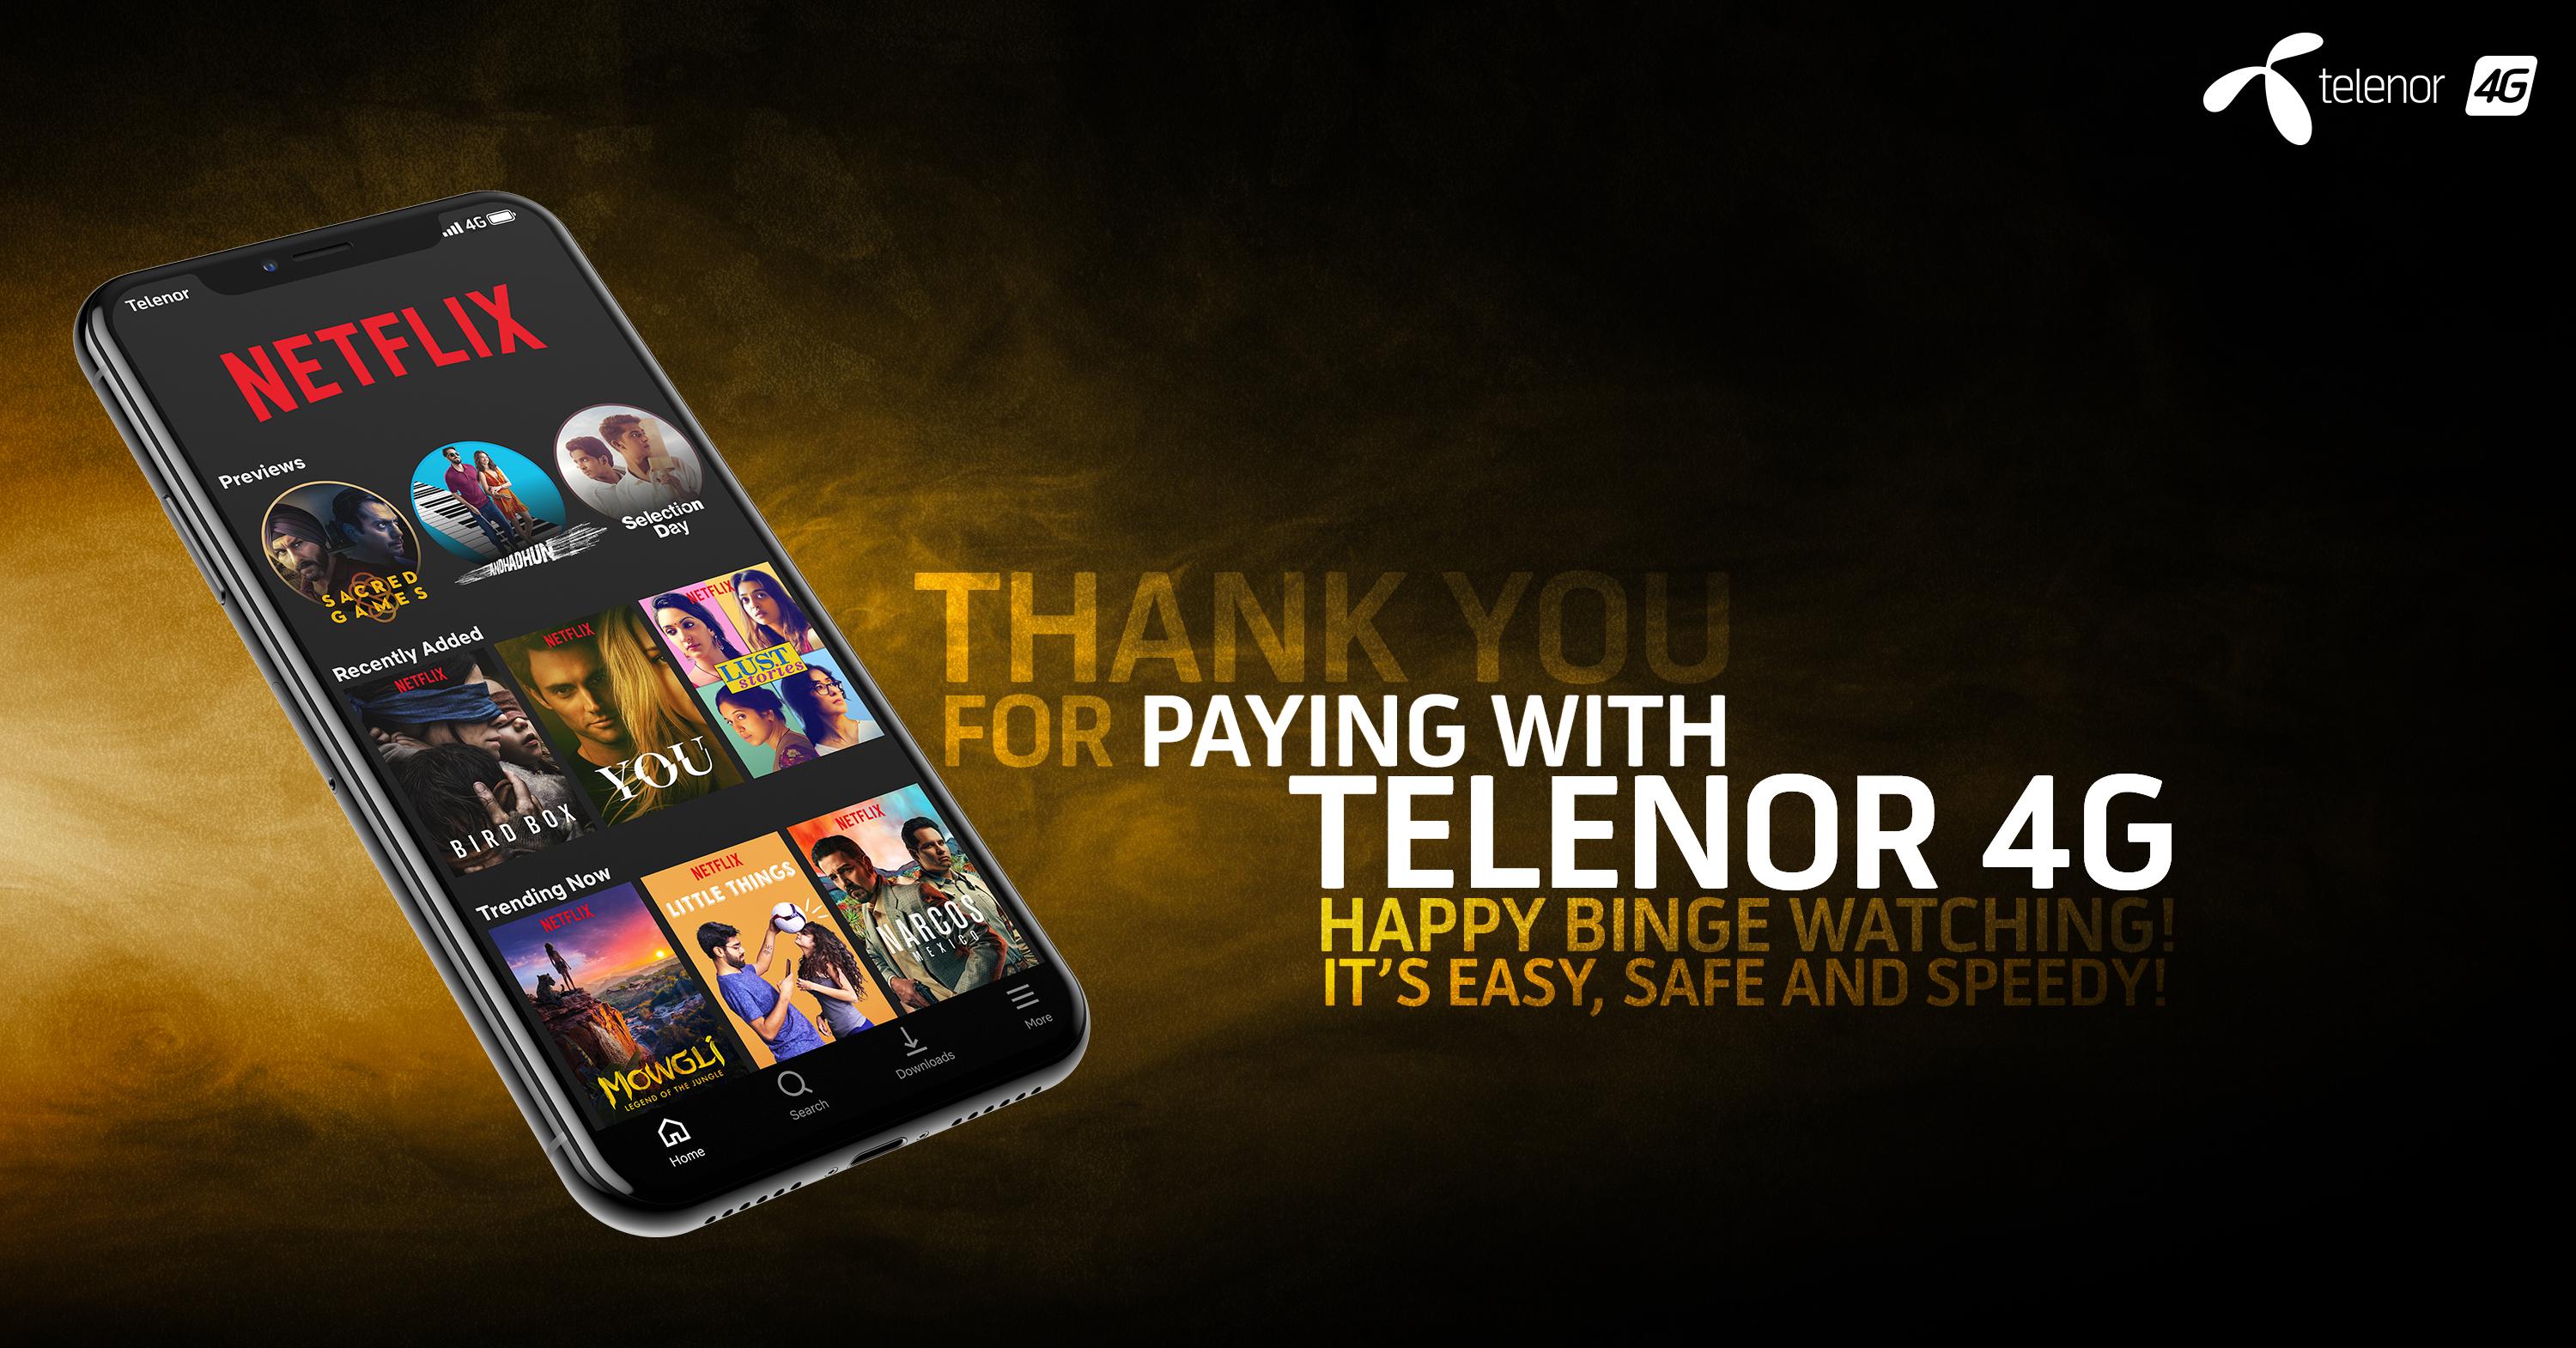 Telenor Pakistan partners with Netflix Telenor postpaid and corporate customers can now pay for Netflix subscriptions through their mobile bills